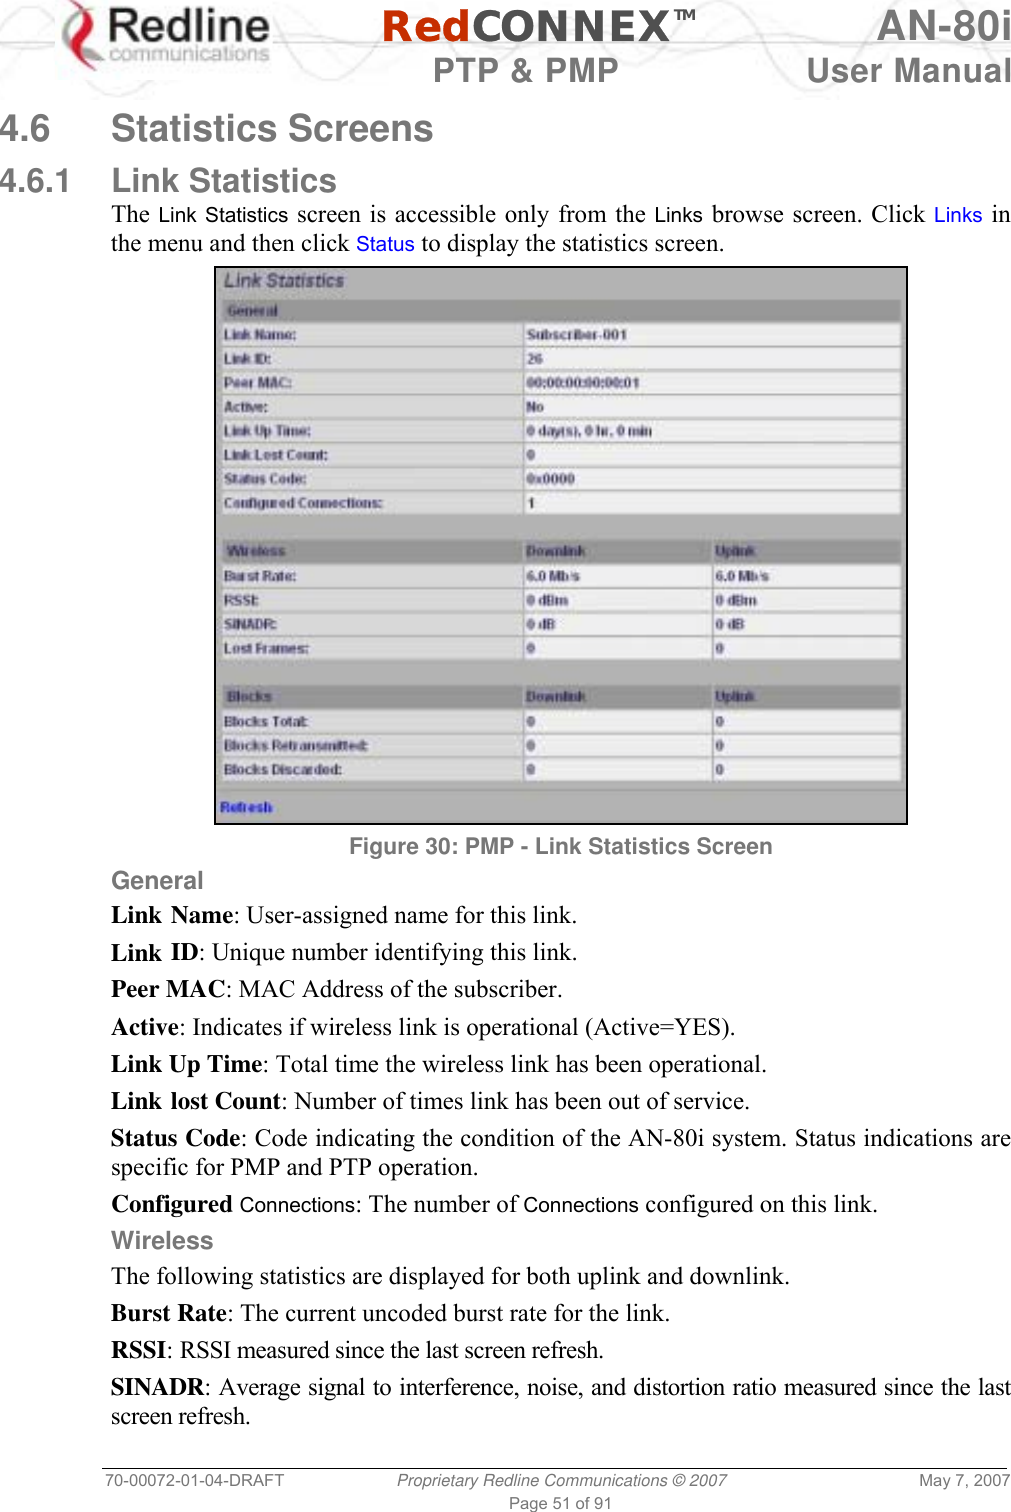   RedCONNEXTM AN-80i   PTP &amp; PMP  User Manual 70-00072-01-04-DRAFT  Proprietary Redline Communications © 2007  May 7, 2007 Page 51 of 91  4.6 Statistics Screens 4.6.1 Link Statistics The Link Statistics screen is accessible only from the Links browse screen. Click Links in the menu and then click Status to display the statistics screen.   Figure 30: PMP - Link Statistics Screen General Link Name: User-assigned name for this link. Link ID: Unique number identifying this link. Peer MAC: MAC Address of the subscriber. Active: Indicates if wireless link is operational (Active=YES). Link Up Time: Total time the wireless link has been operational. Link lost Count: Number of times link has been out of service. Status Code: Code indicating the condition of the AN-80i system. Status indications are specific for PMP and PTP operation.  Configured Connections: The number of Connections configured on this link. Wireless The following statistics are displayed for both uplink and downlink. Burst Rate: The current uncoded burst rate for the link. RSSI: RSSI measured since the last screen refresh. SINADR: Average signal to interference, noise, and distortion ratio measured since the last screen refresh. 